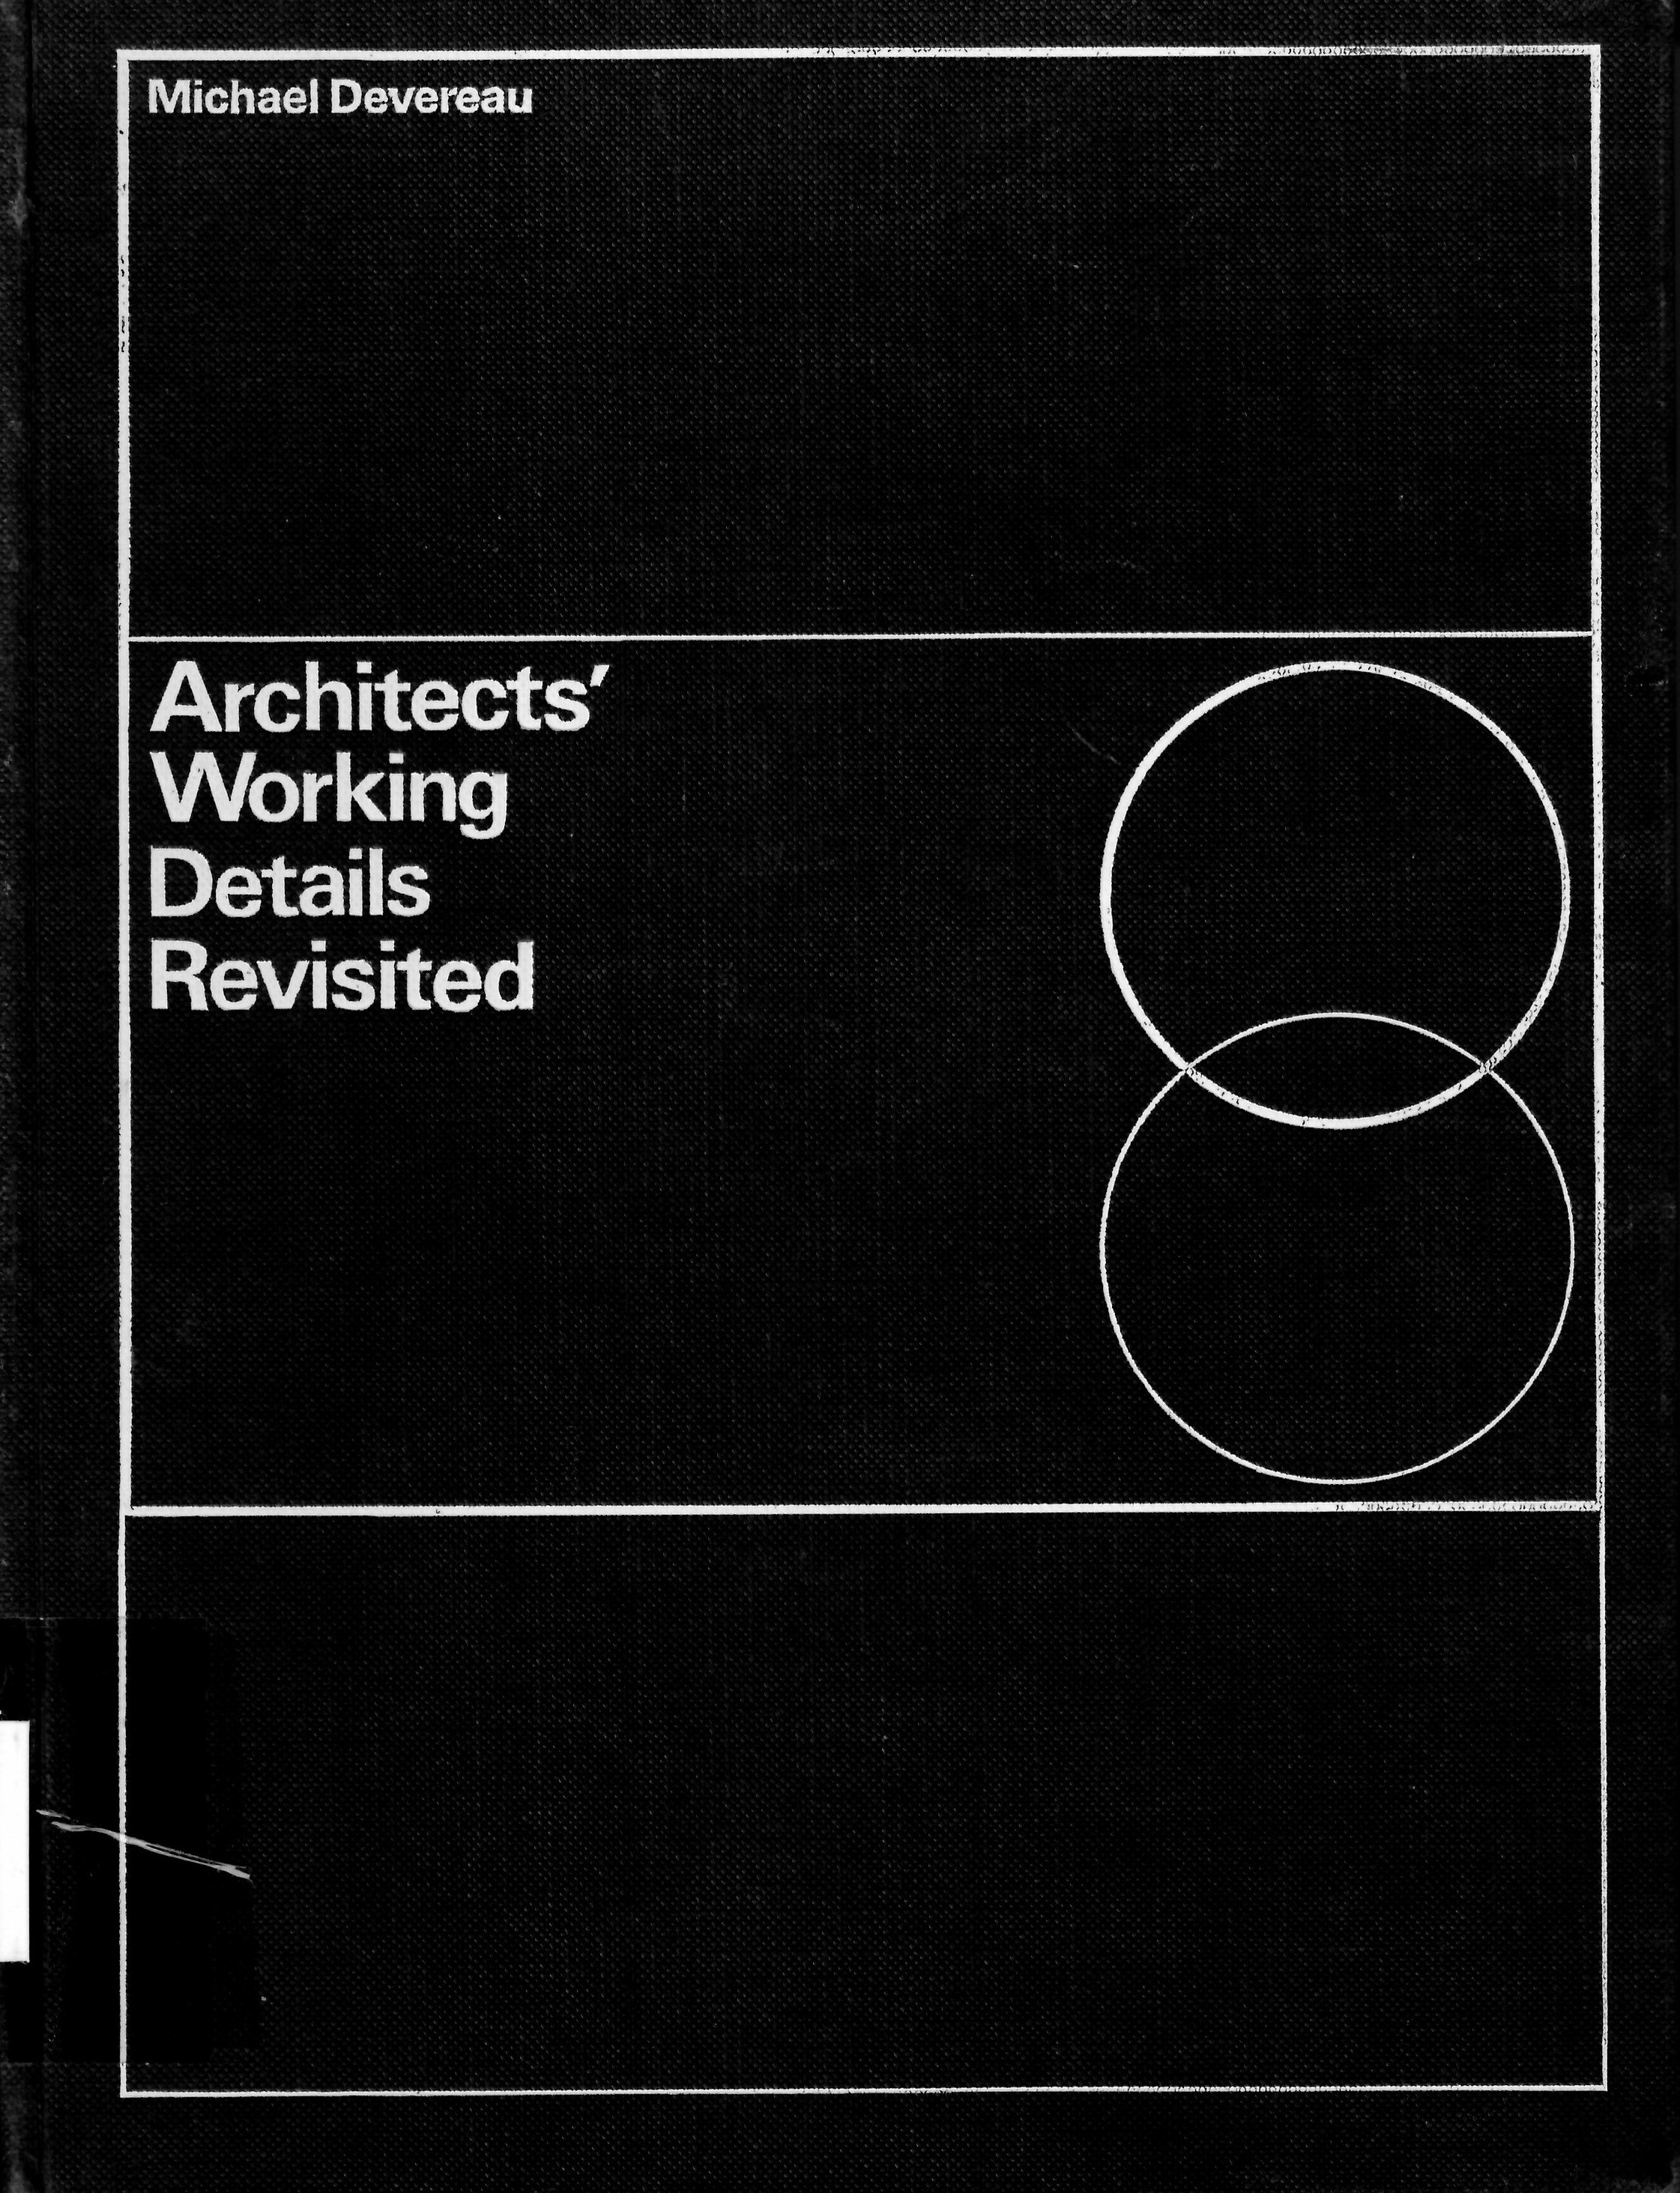 Architects' working details revisited.